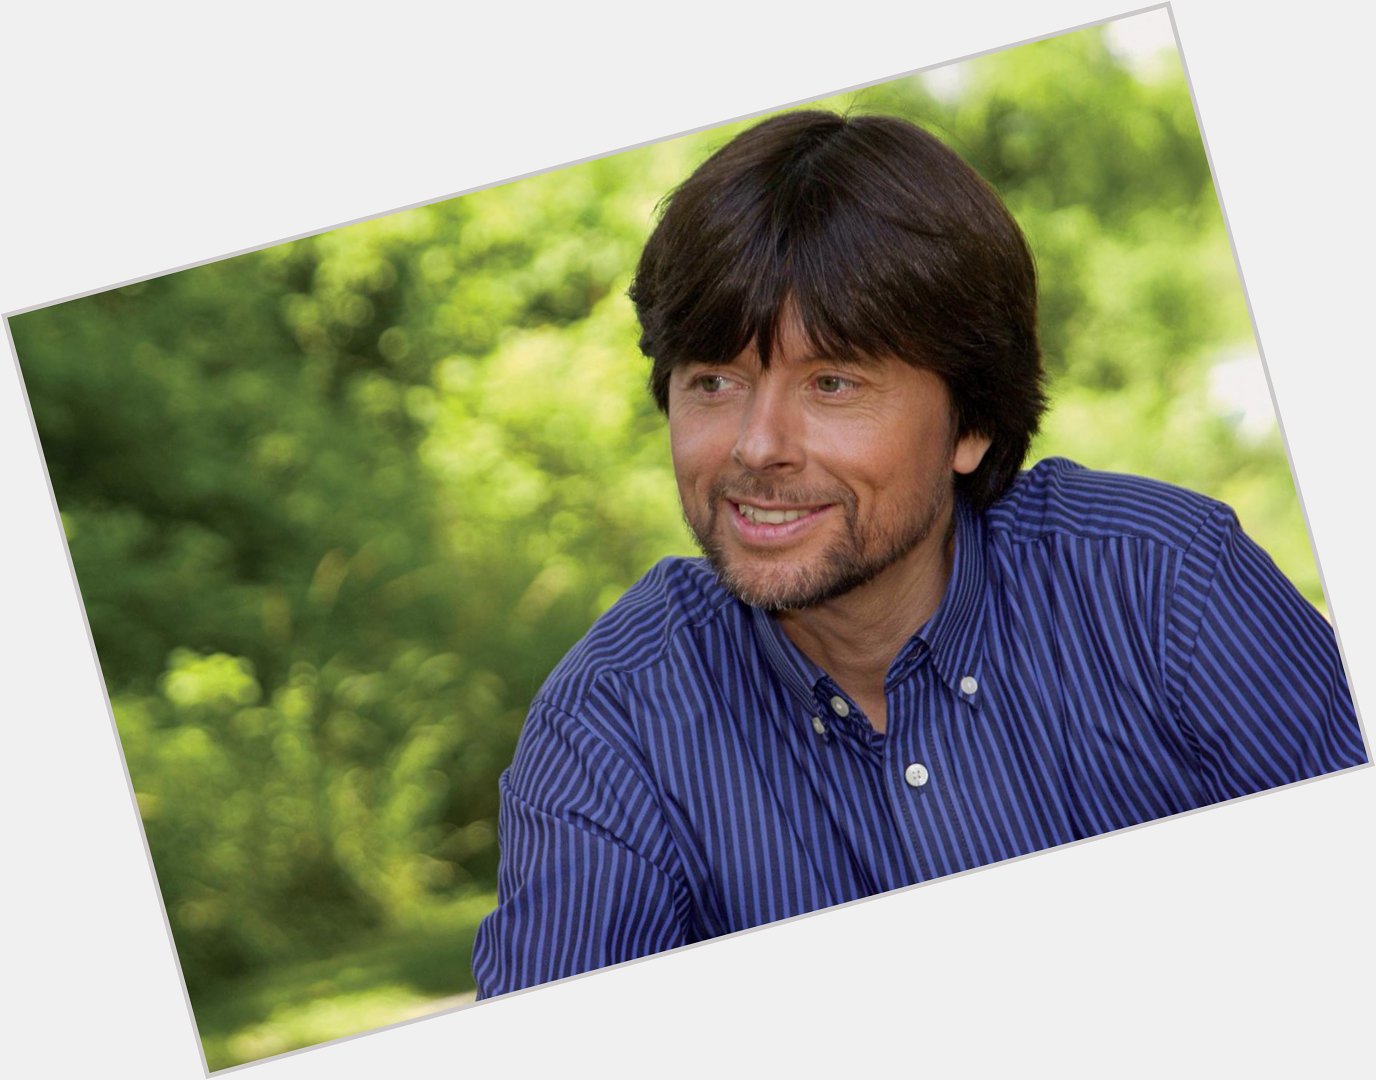 Happy Birthday to Ken Burns, who turns 62 today! 